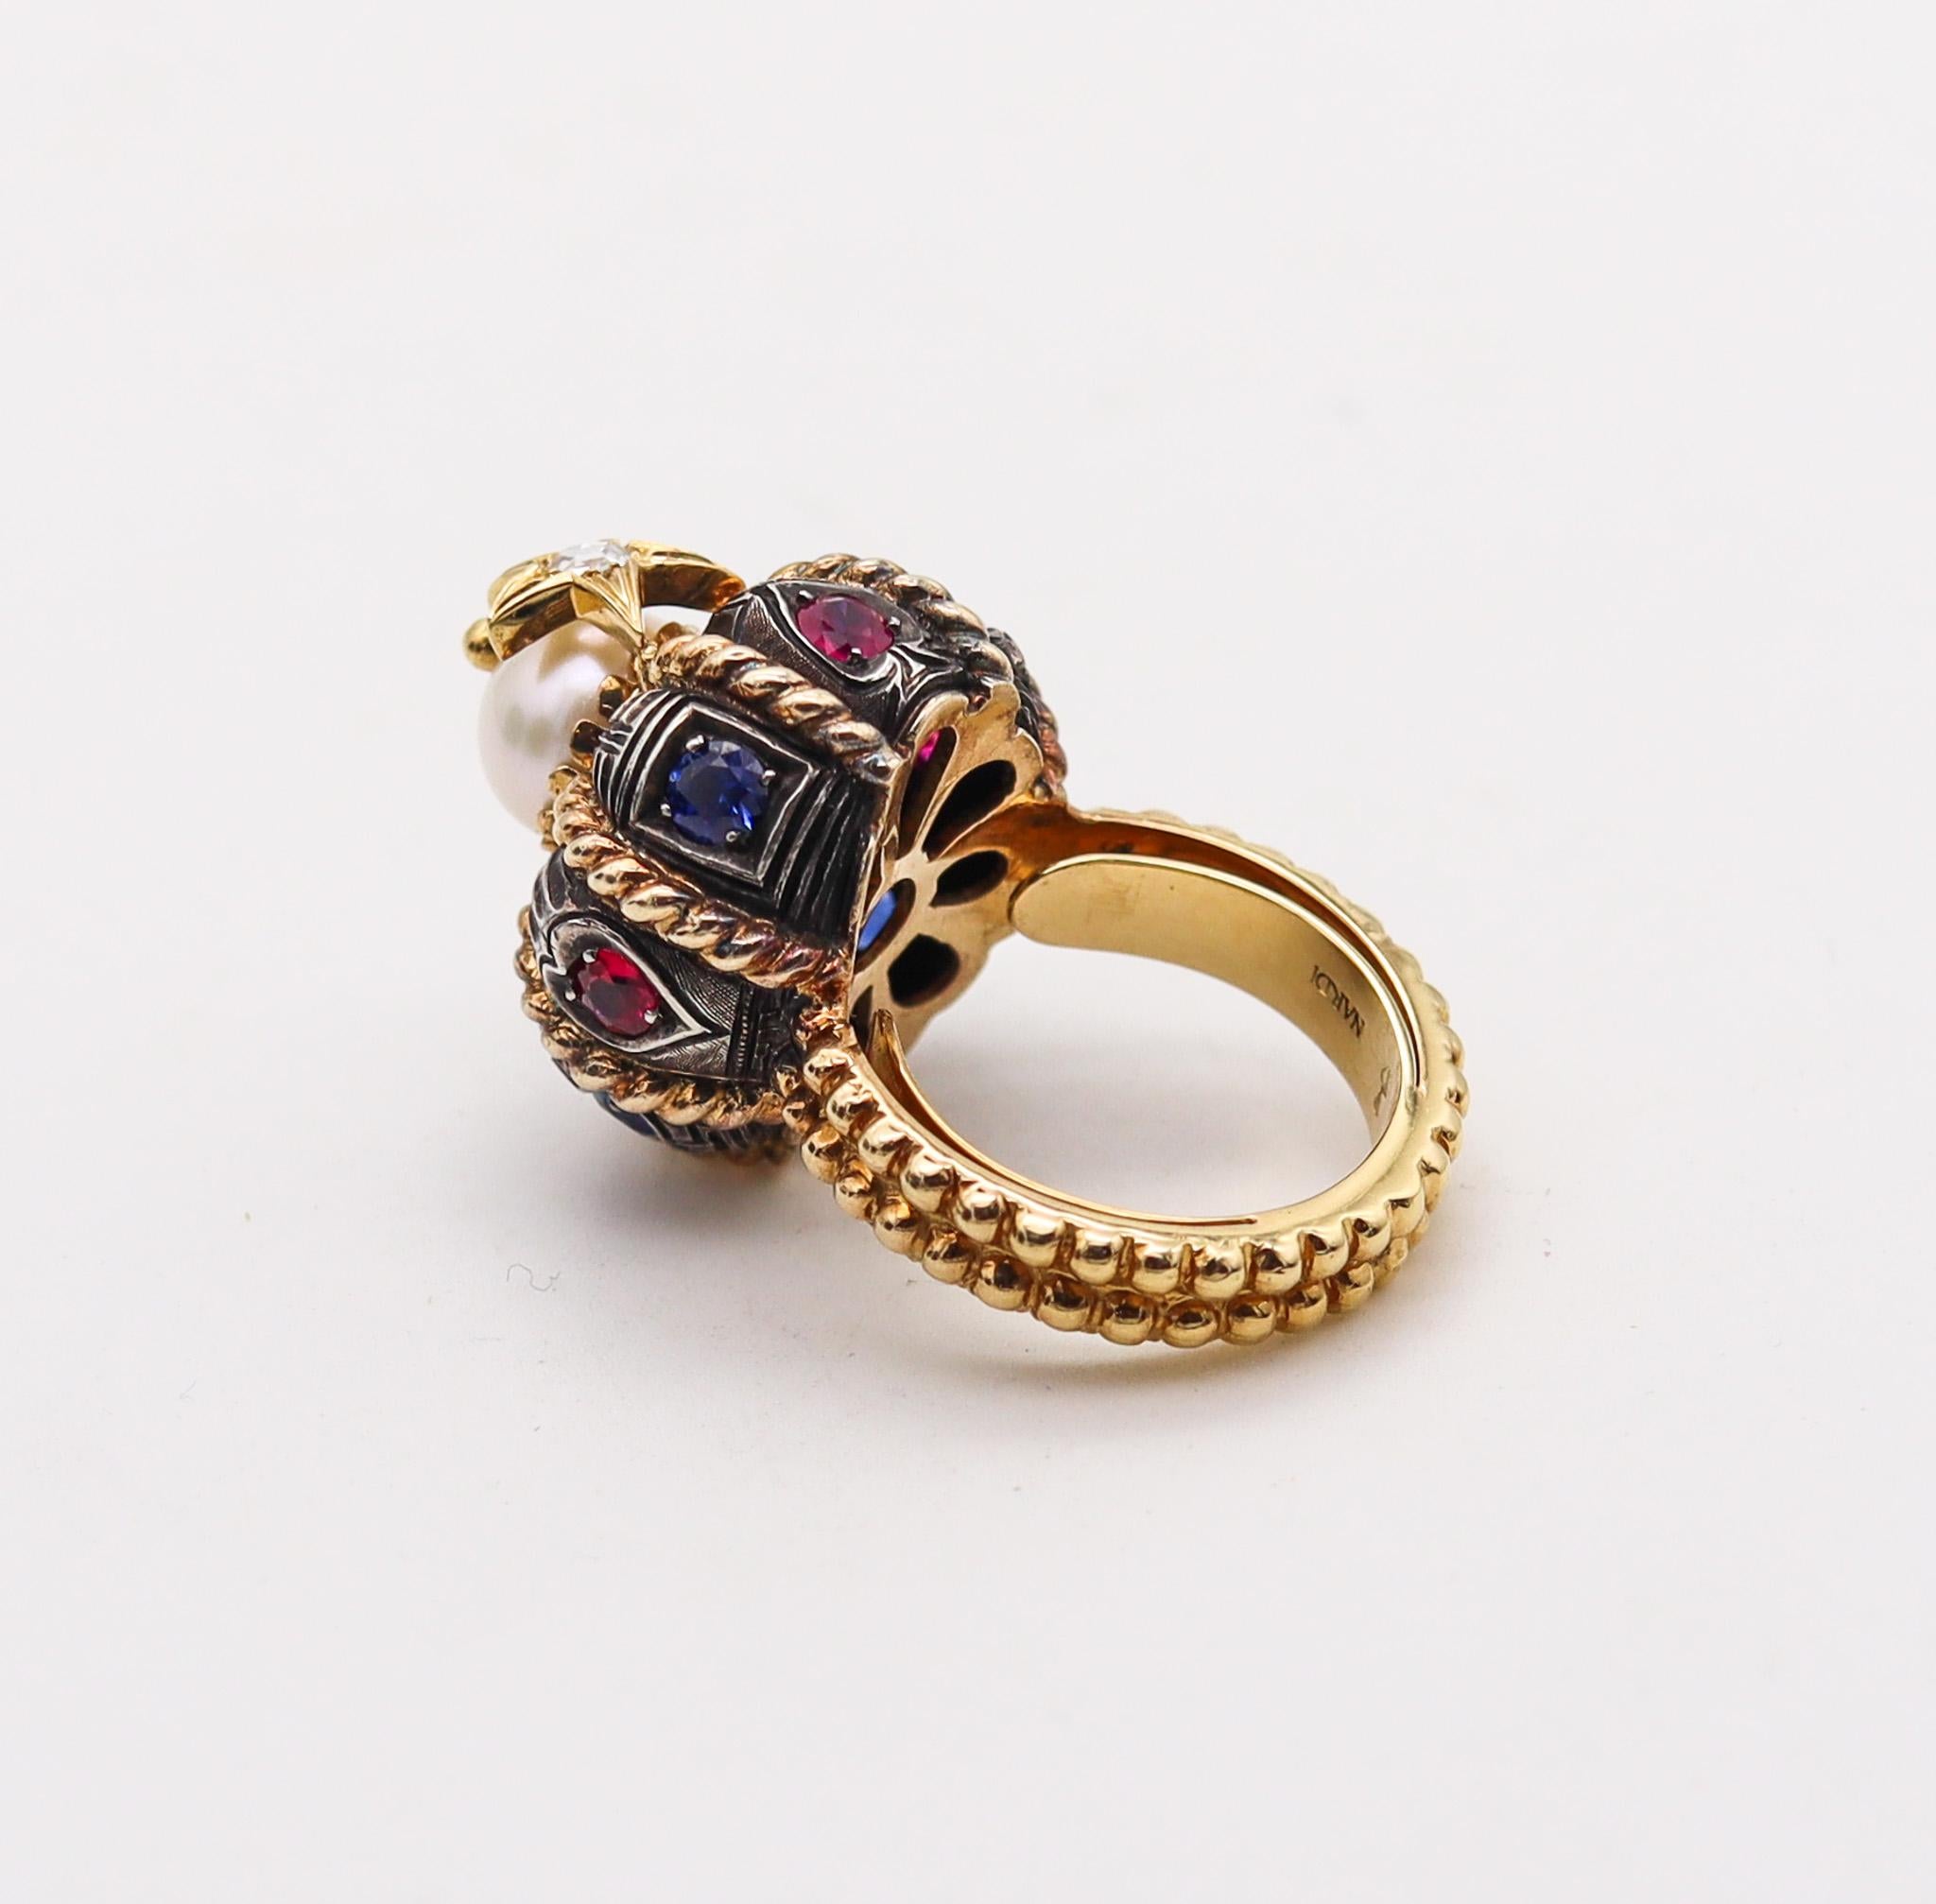 Round Cut Nardi Venice Unusual Turban Cocktail Ring In 18Kt Gold With Color Gemstones For Sale